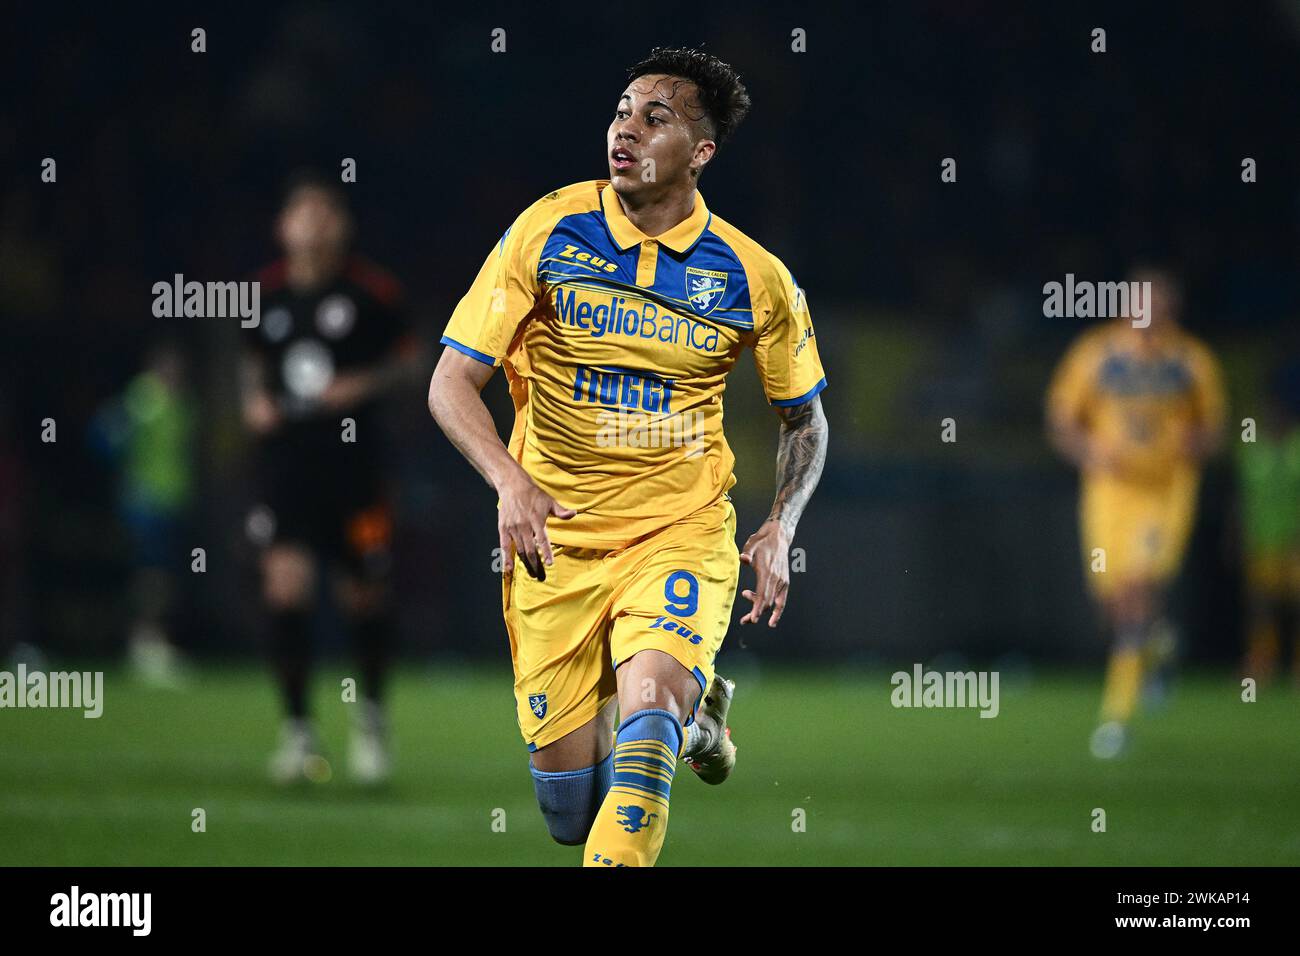 Kaio Jorge of Frosinone Calcio in action during the Serie A match between Frosinone Calcio and AS Roma at Stadio Benito Stirpe Frosinone Italy on 18 F Stock Photo